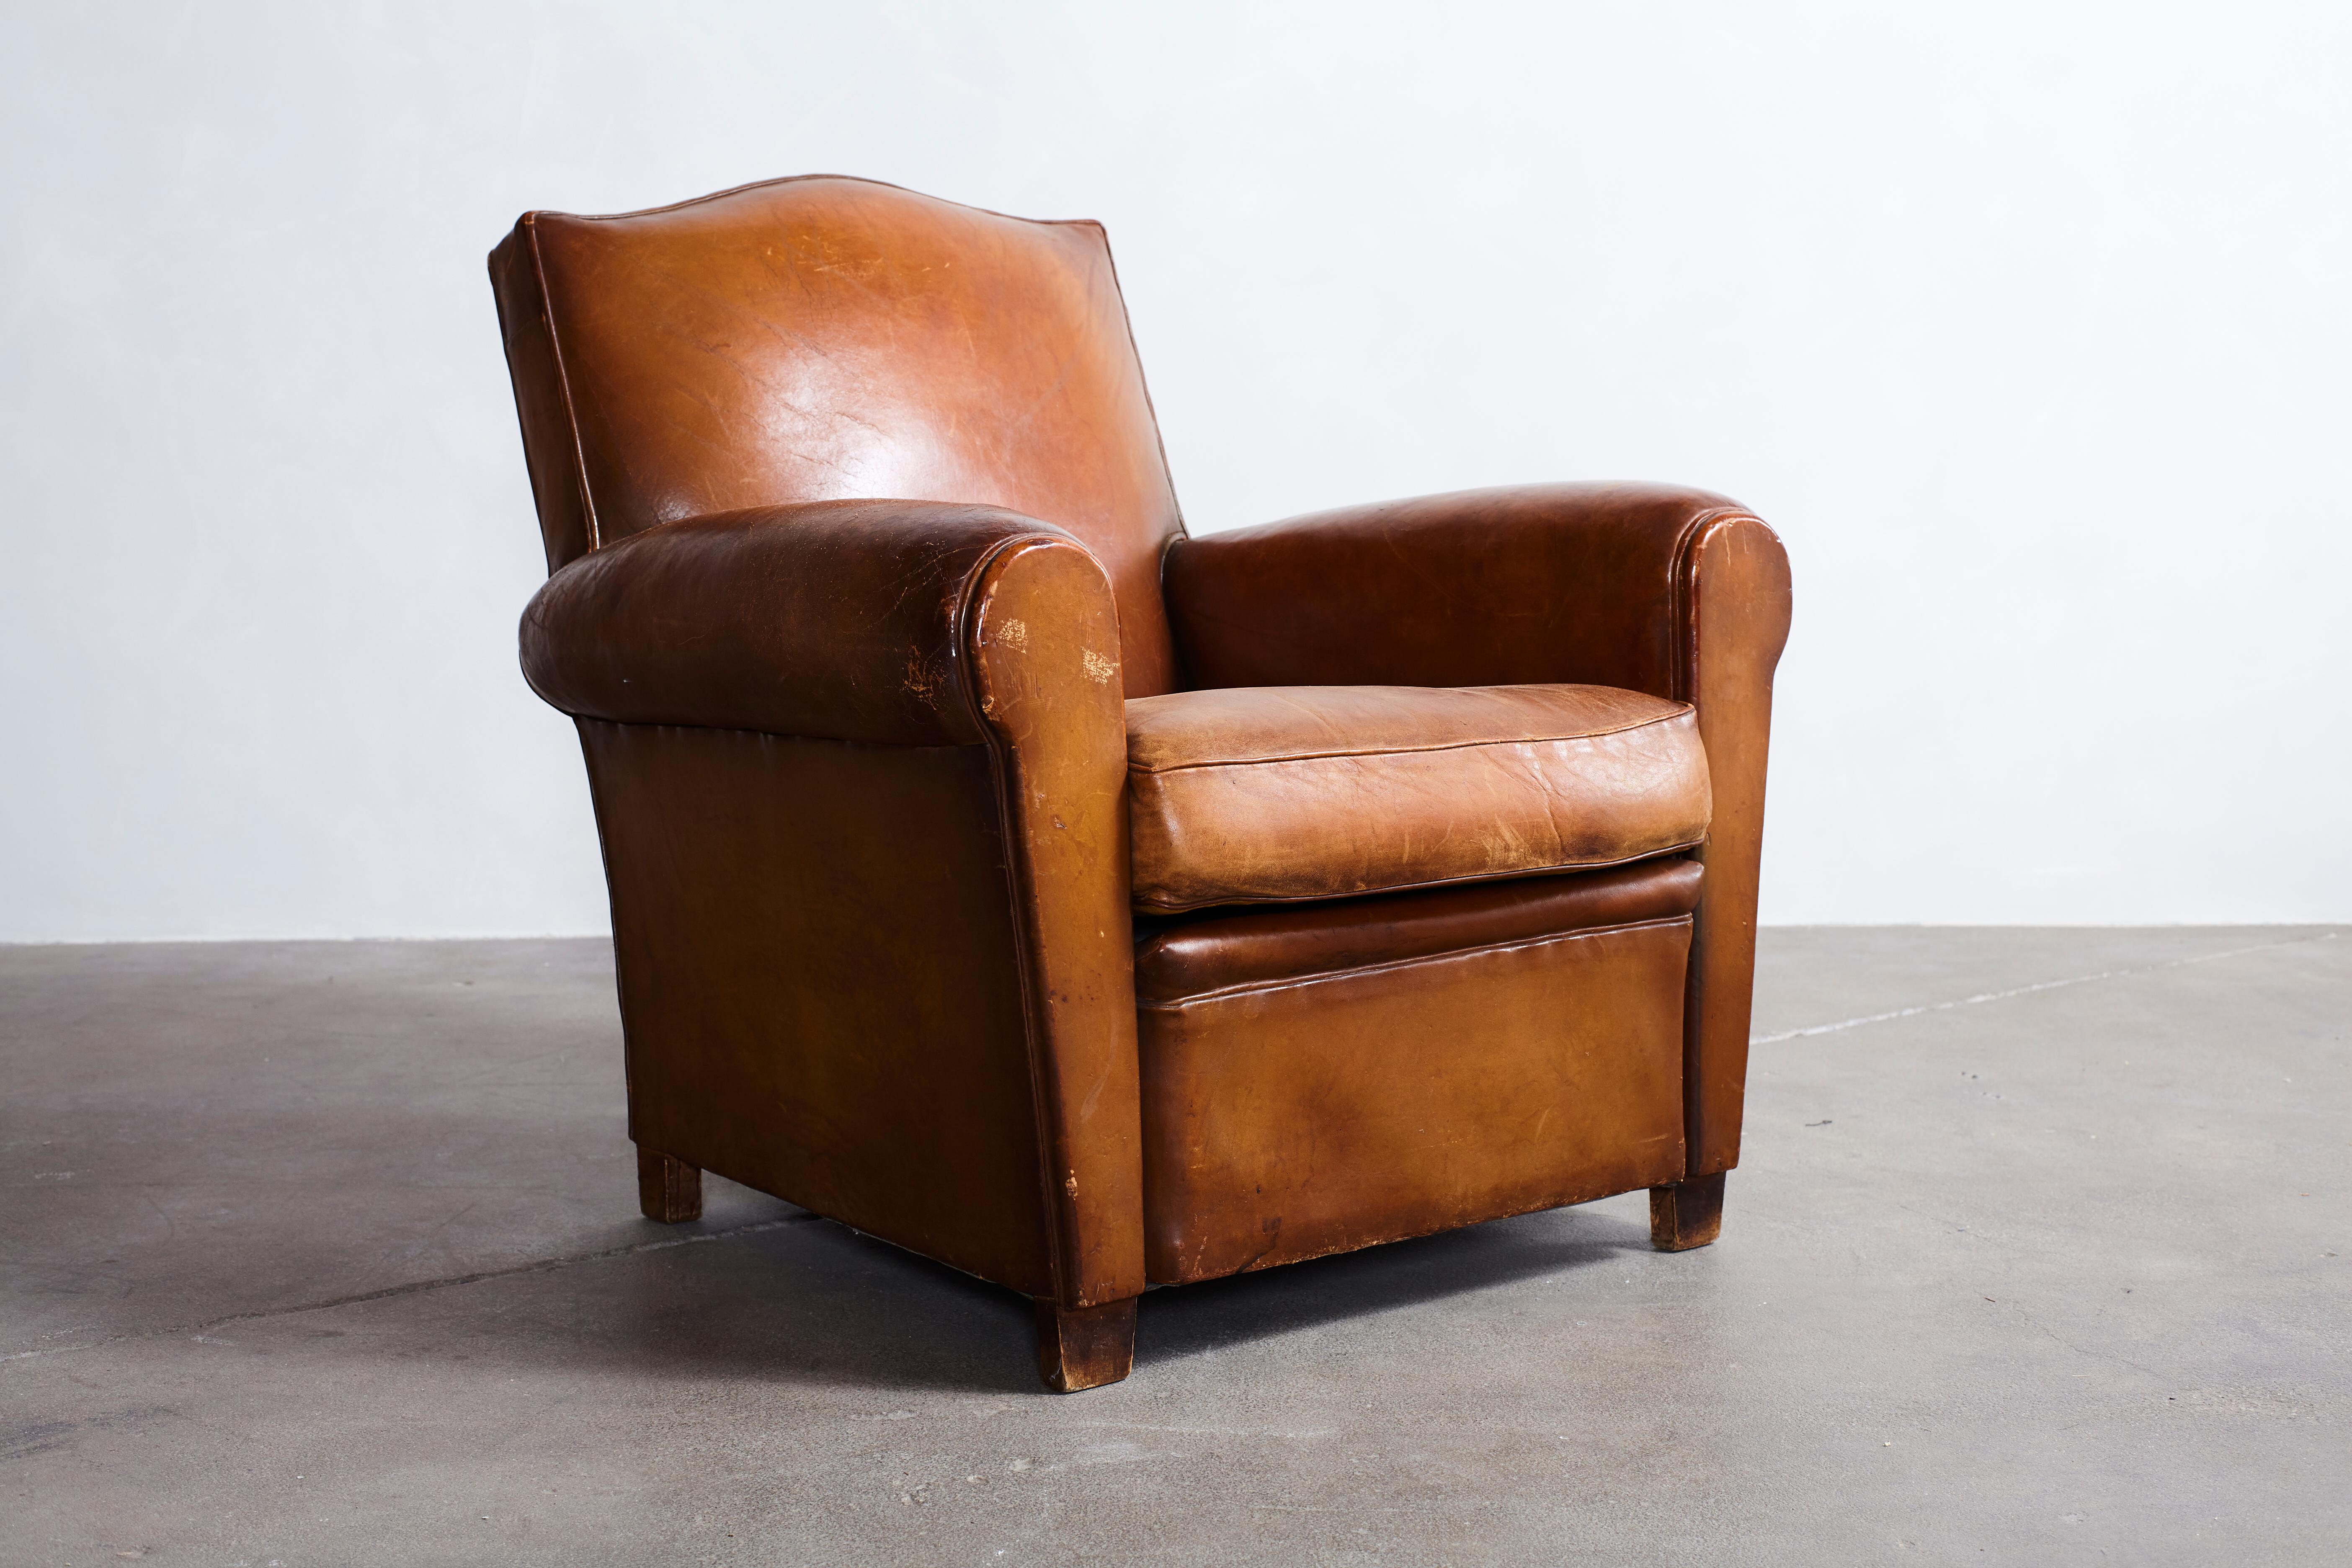 French leather petite club chair with unique crown top details.